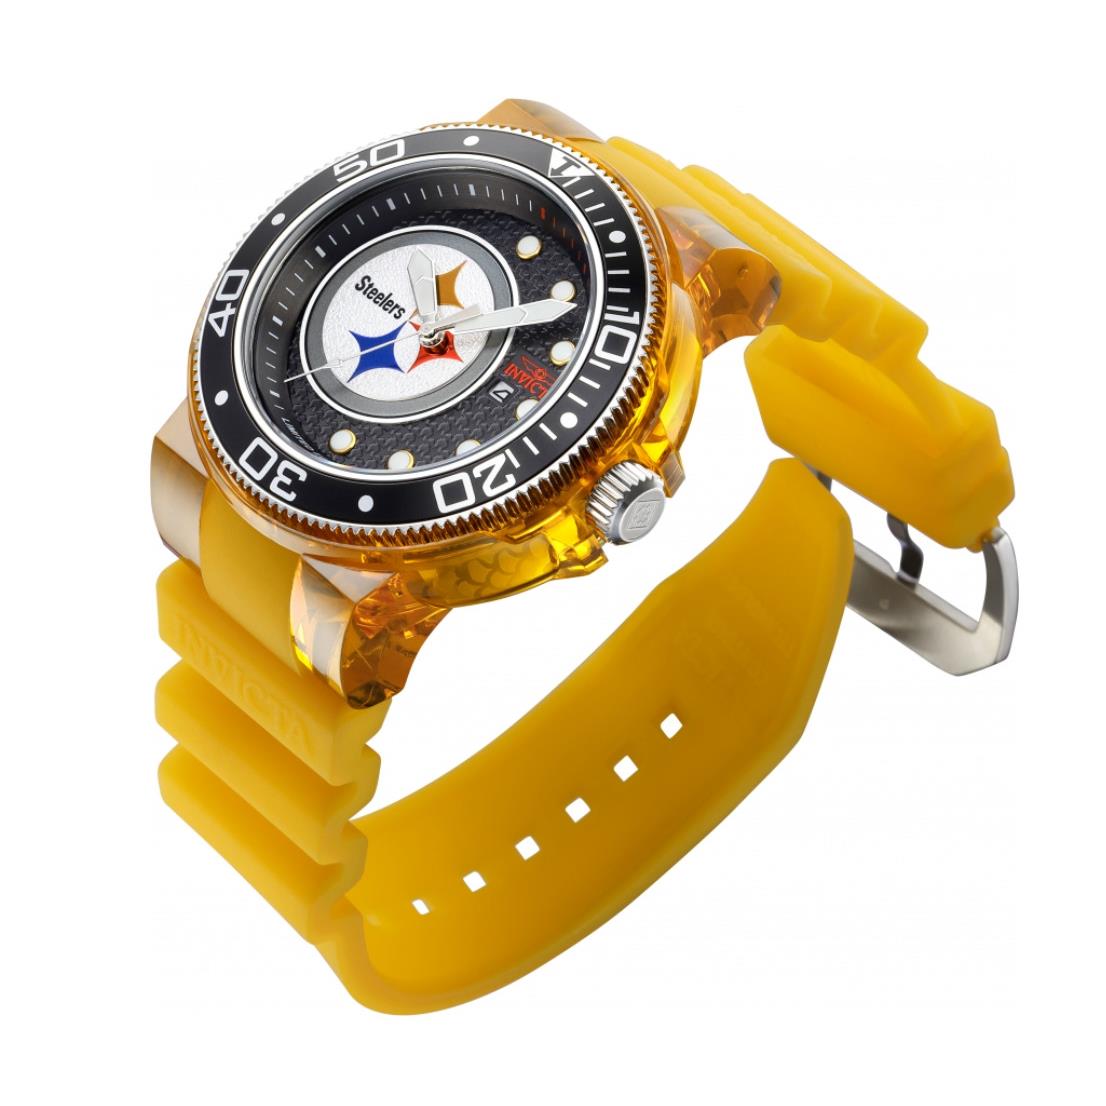 Invicta Nfl Pittsburgh Steeler Men`s 52mm Pro Diver Limited Silicone Watch 41450 - Dial: Black Gray Multicolor Silver White, Band: Yellow, Bezel: Black Silver